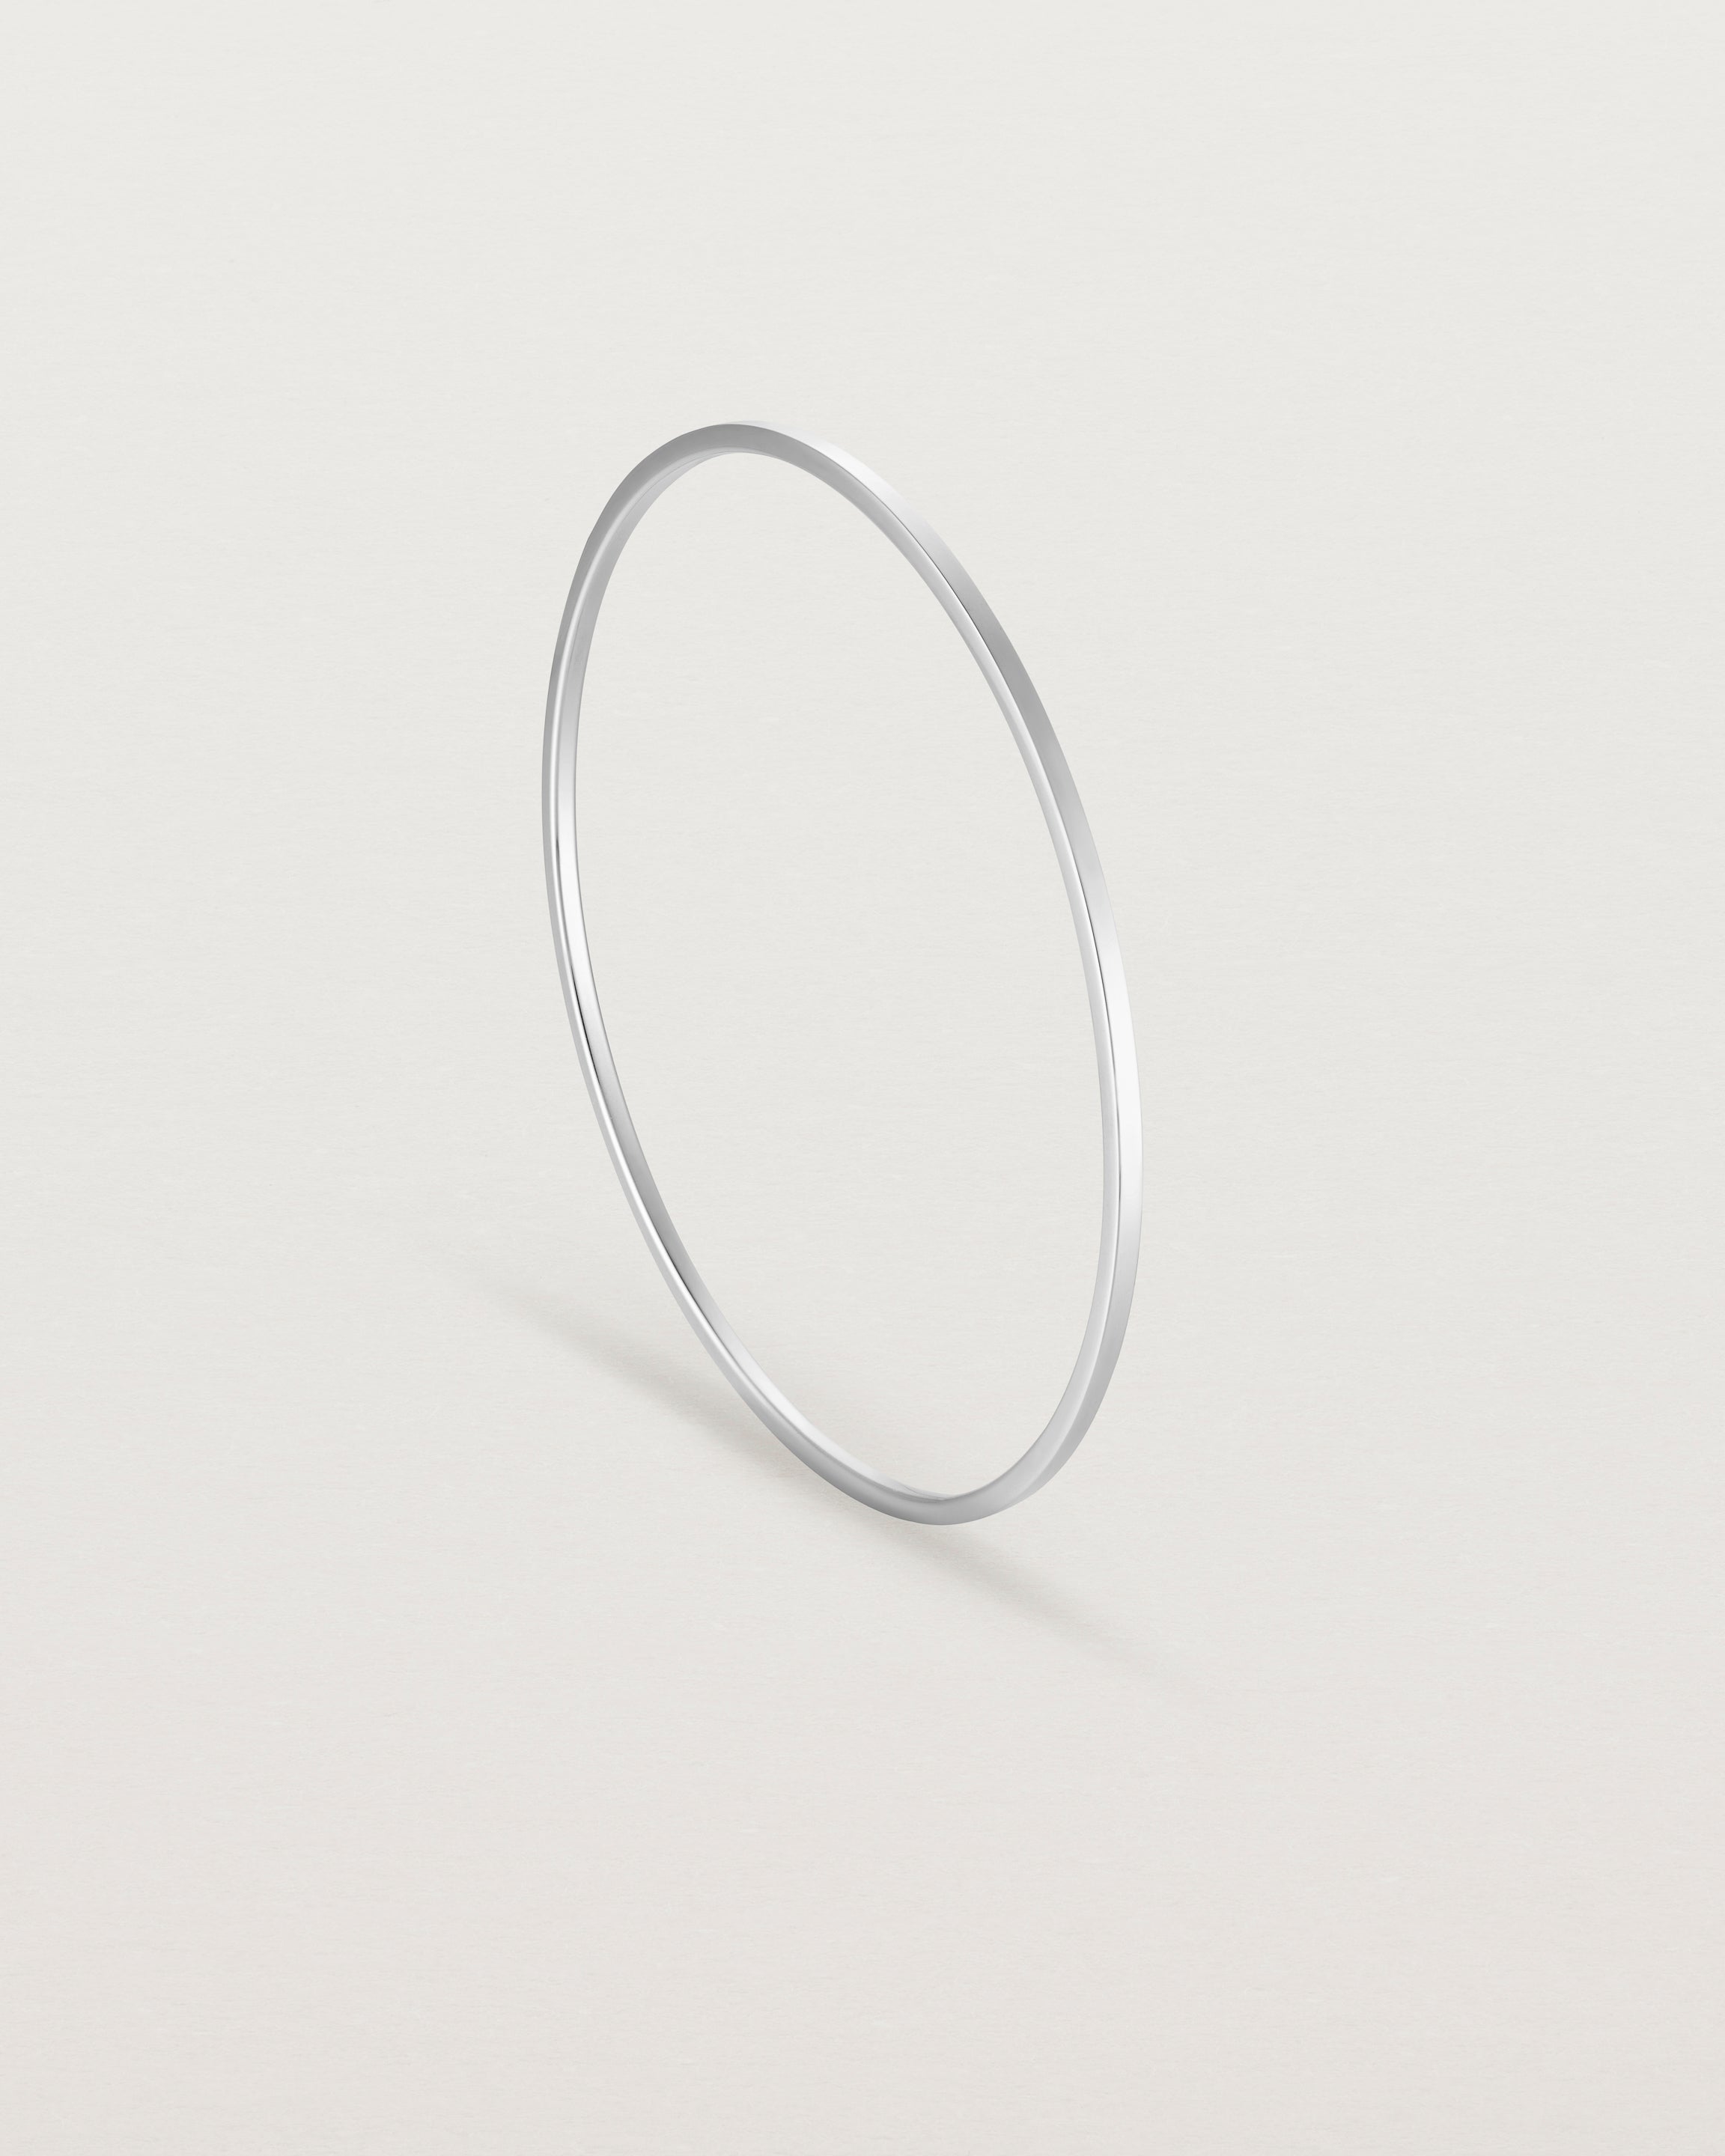 Standing view of the Antares Bangle in Sterling Silver.